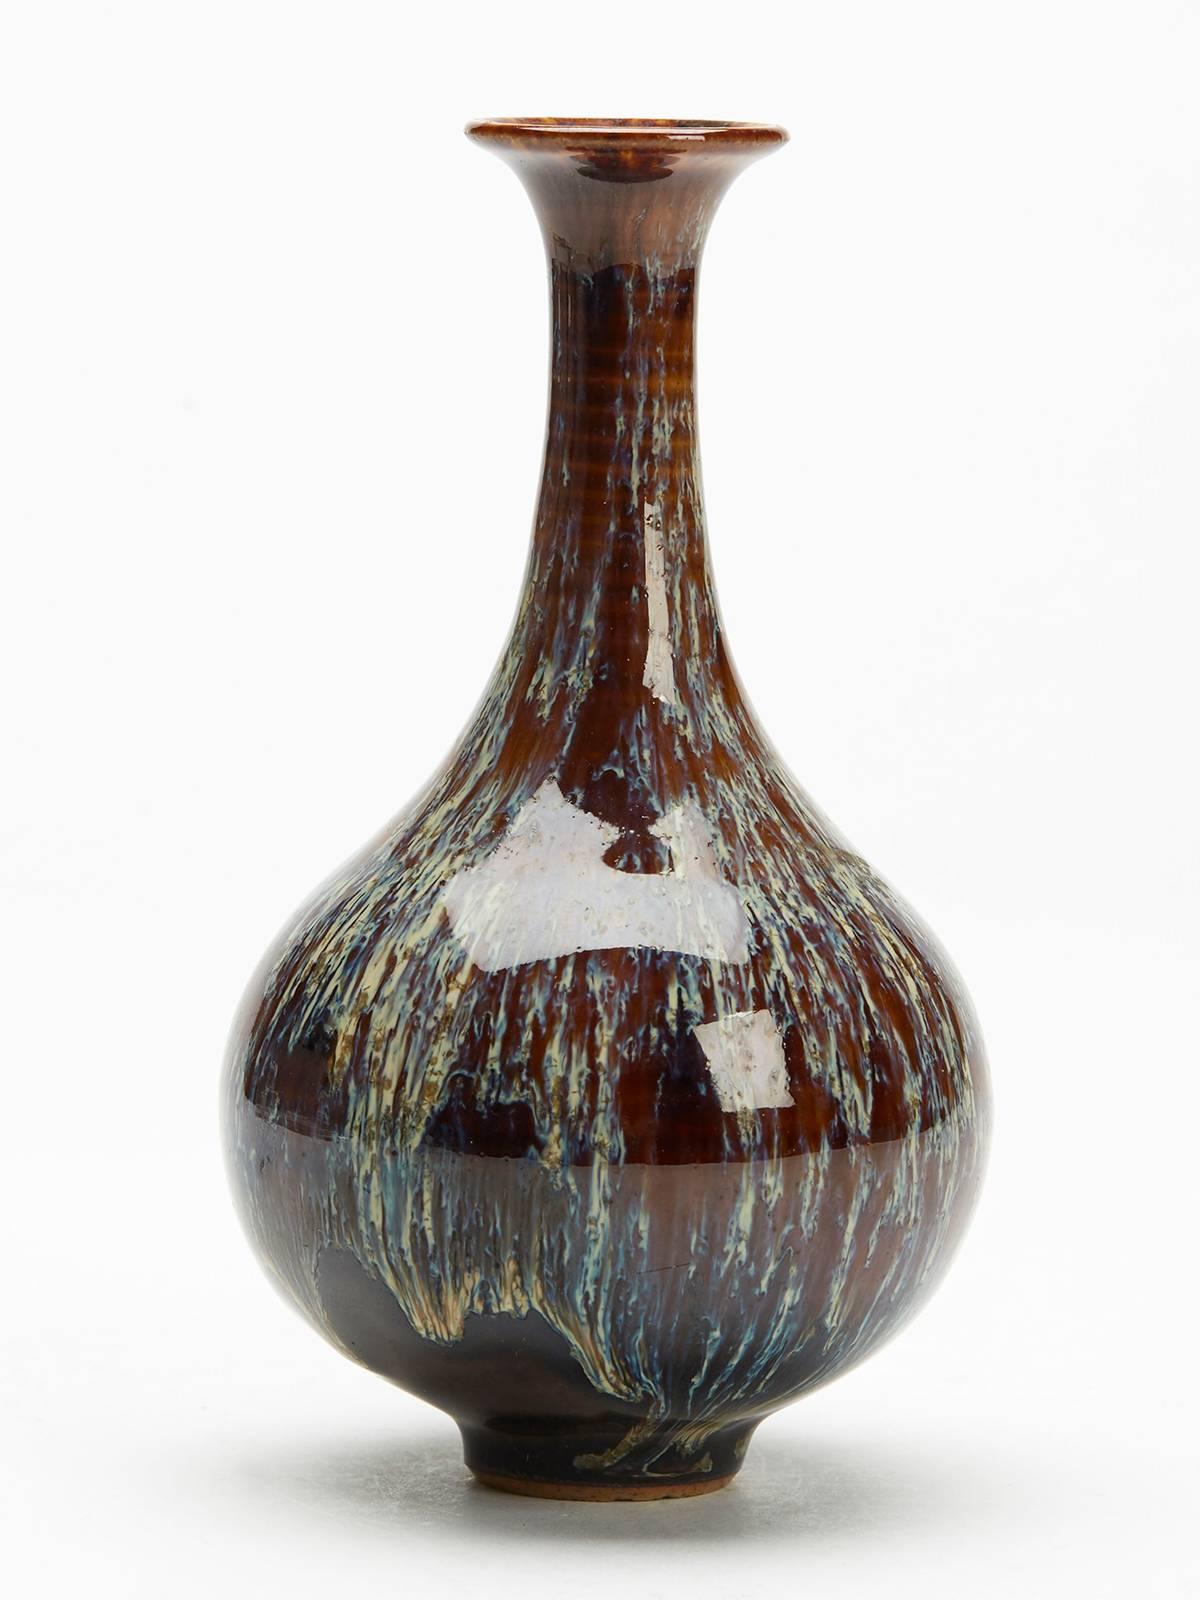 A hand thrown antique Chinese bottle vase decorated in Junyao glazes dripped over a brown glazed ground and dating from the 19th or early 20th century. This finely made vase stands on a narrow rounded unglazed foot and has a rounded bulbous body and